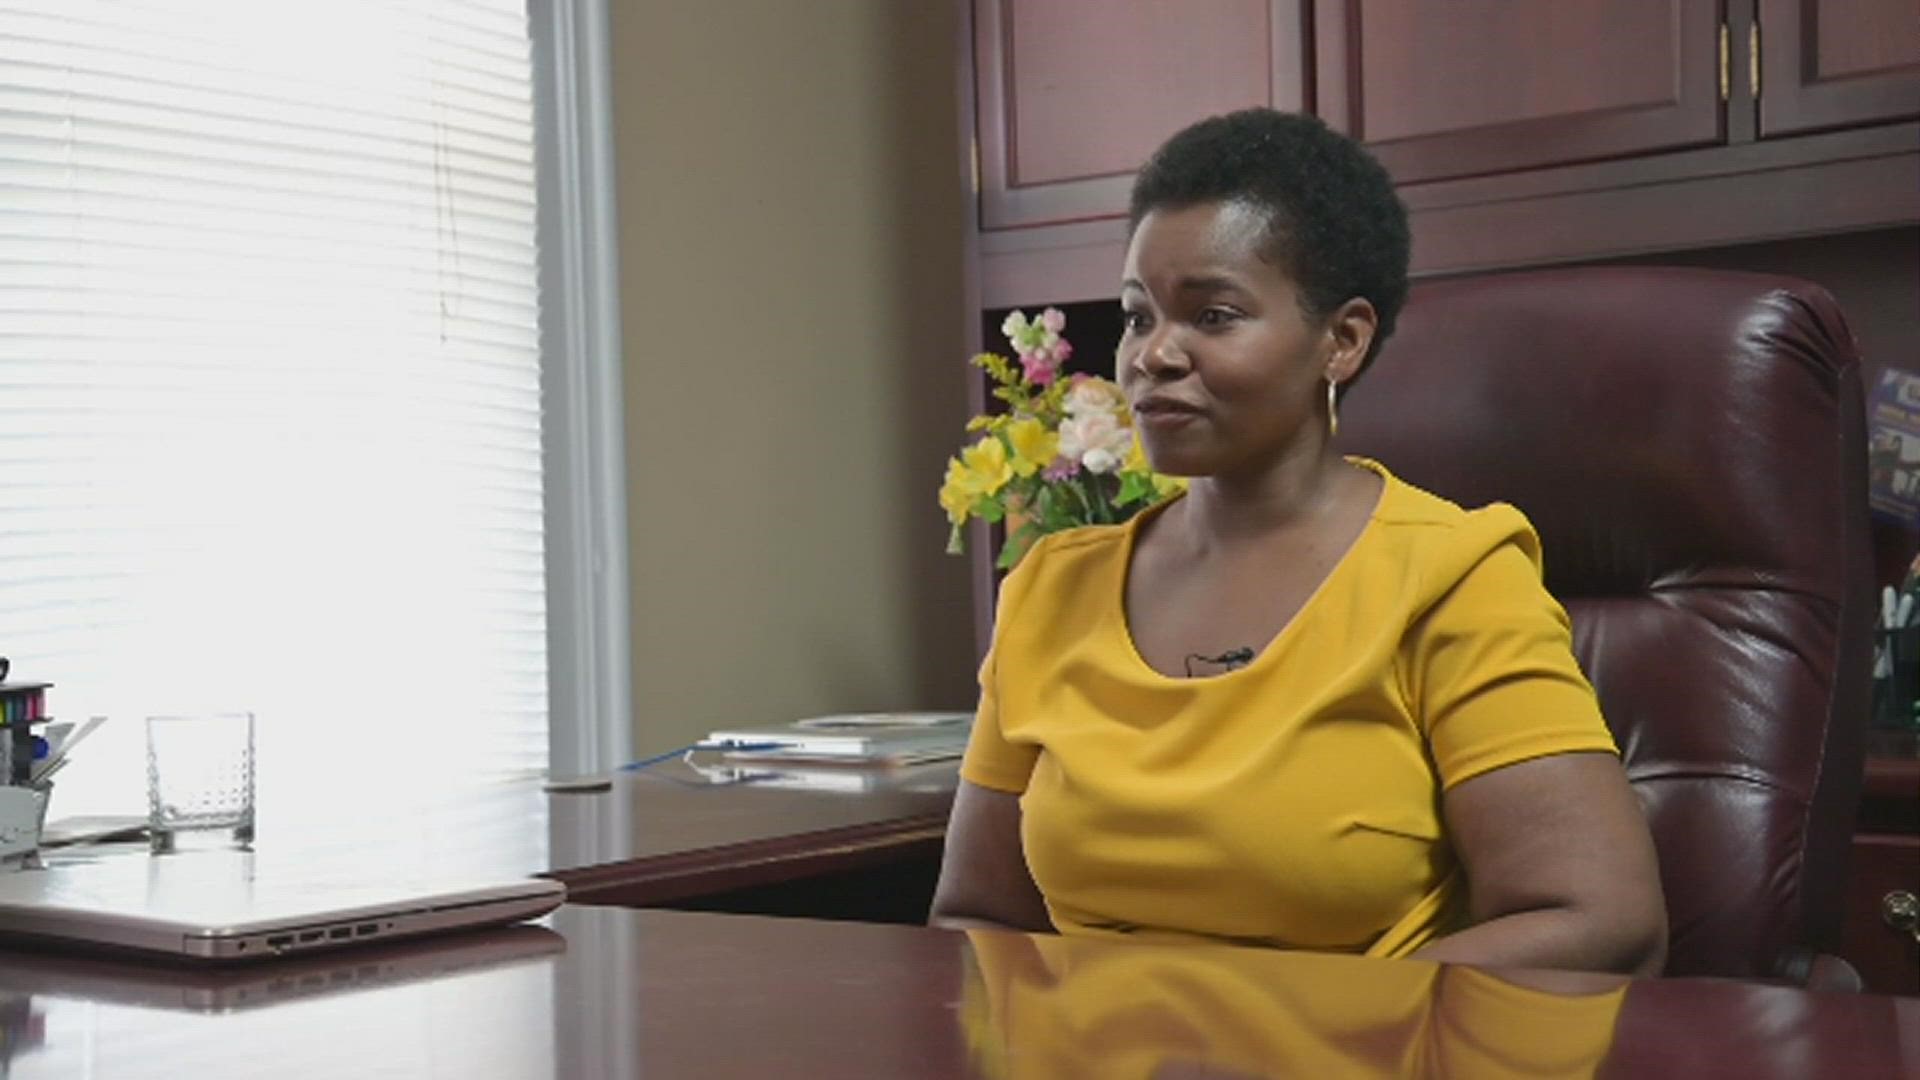 2 On Your Side's Claudine Ewing sat down for a one-on-one interview with India Walton, who won the Democratic Party's City of Buffalo mayoral primary.